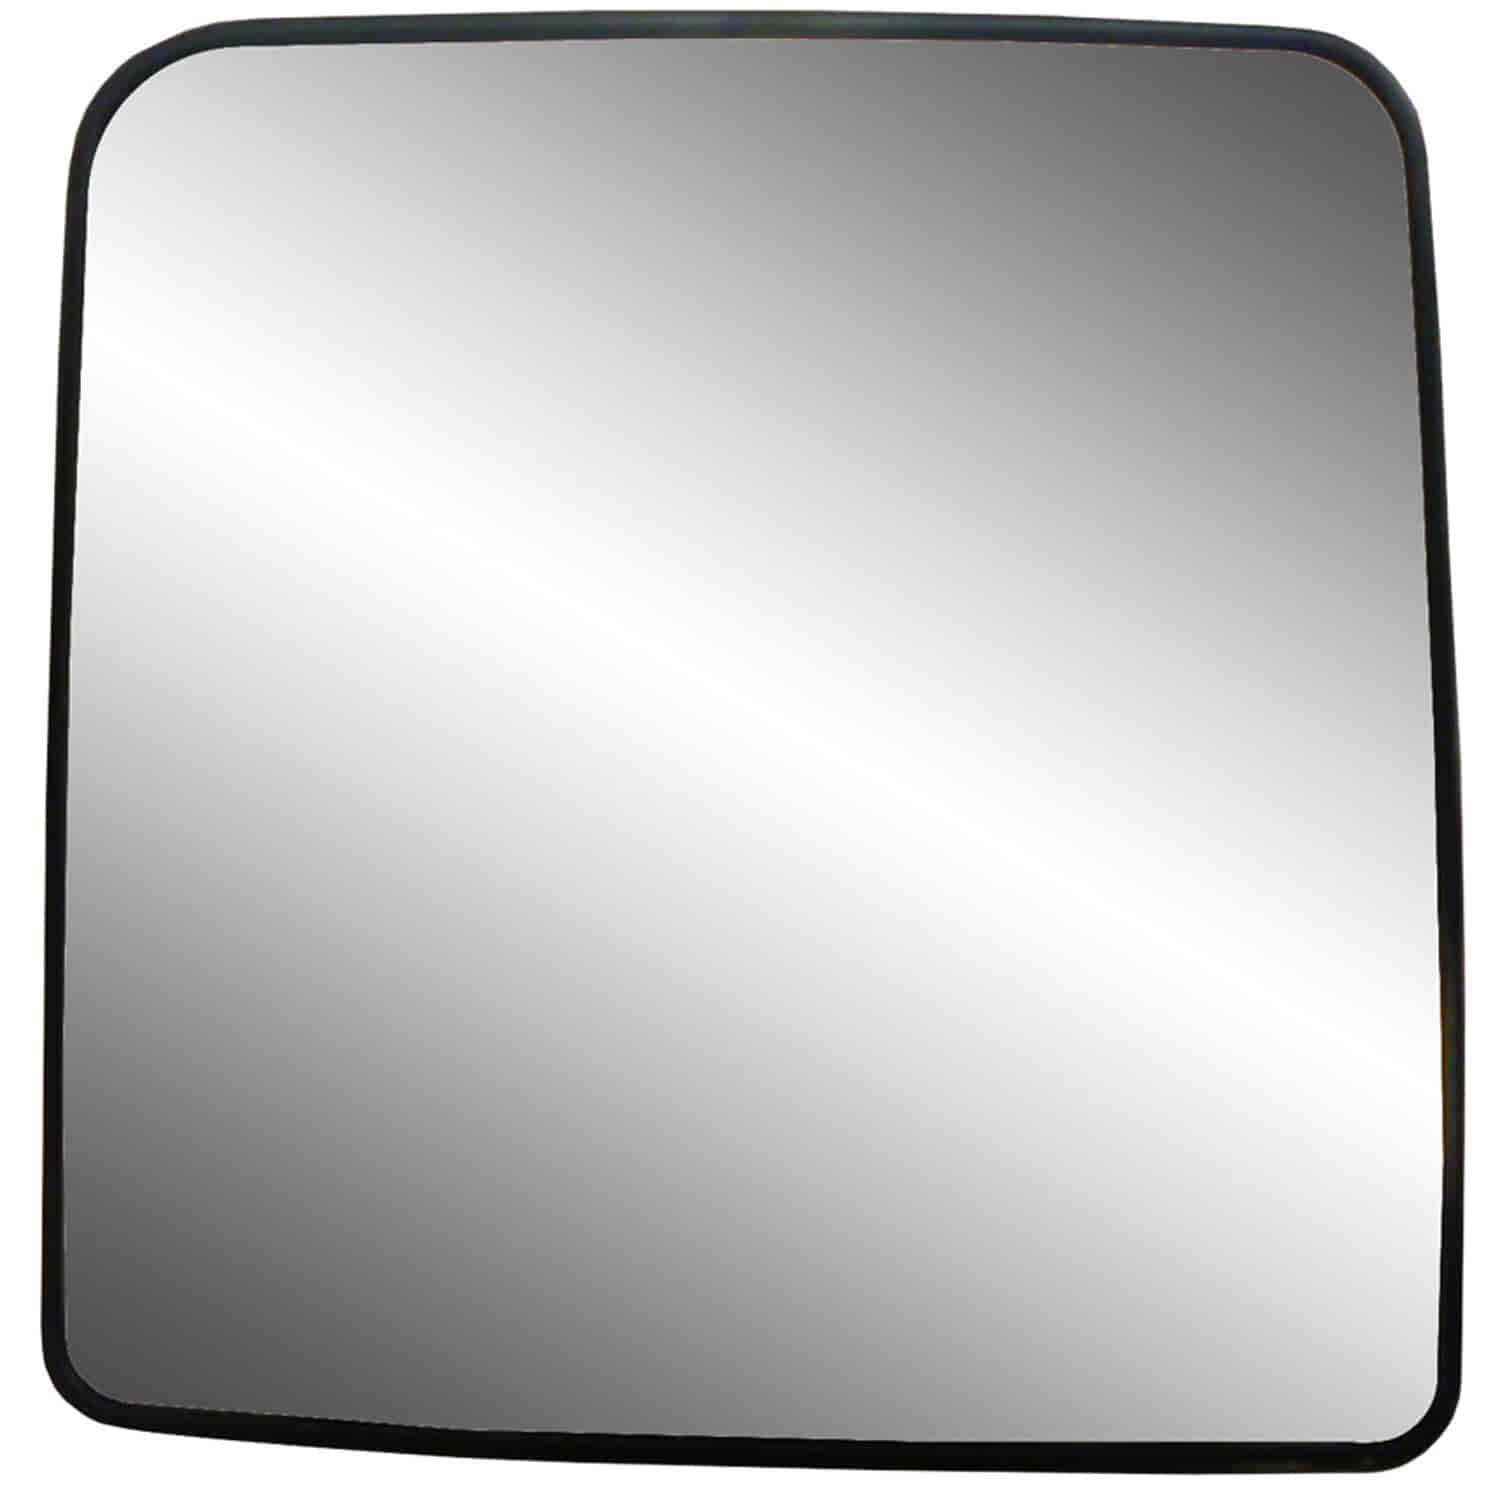 Replacement Glass Assembly for 11-14 Wrangler replace your cracked or broken driver side mirror glas